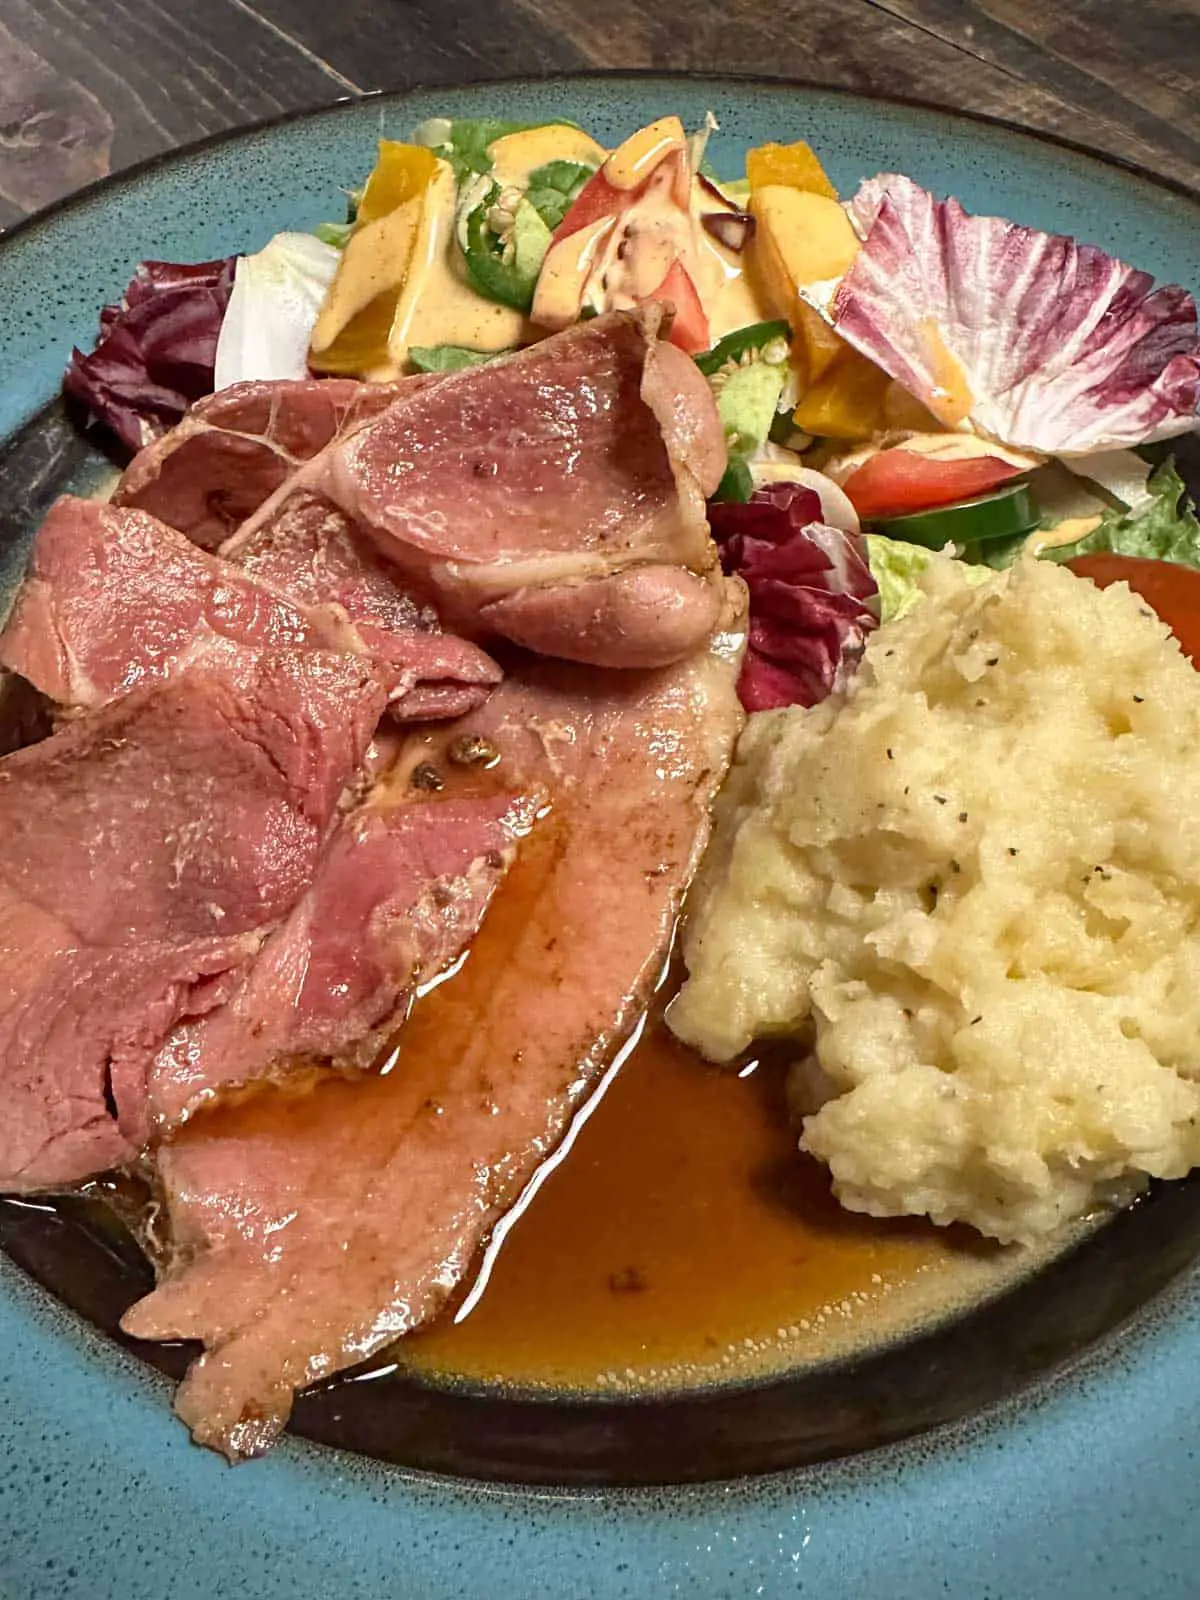 A blue rimmed plate containing country ham slices with red eye gravy poured over them served with mashed potatoes and a salad.